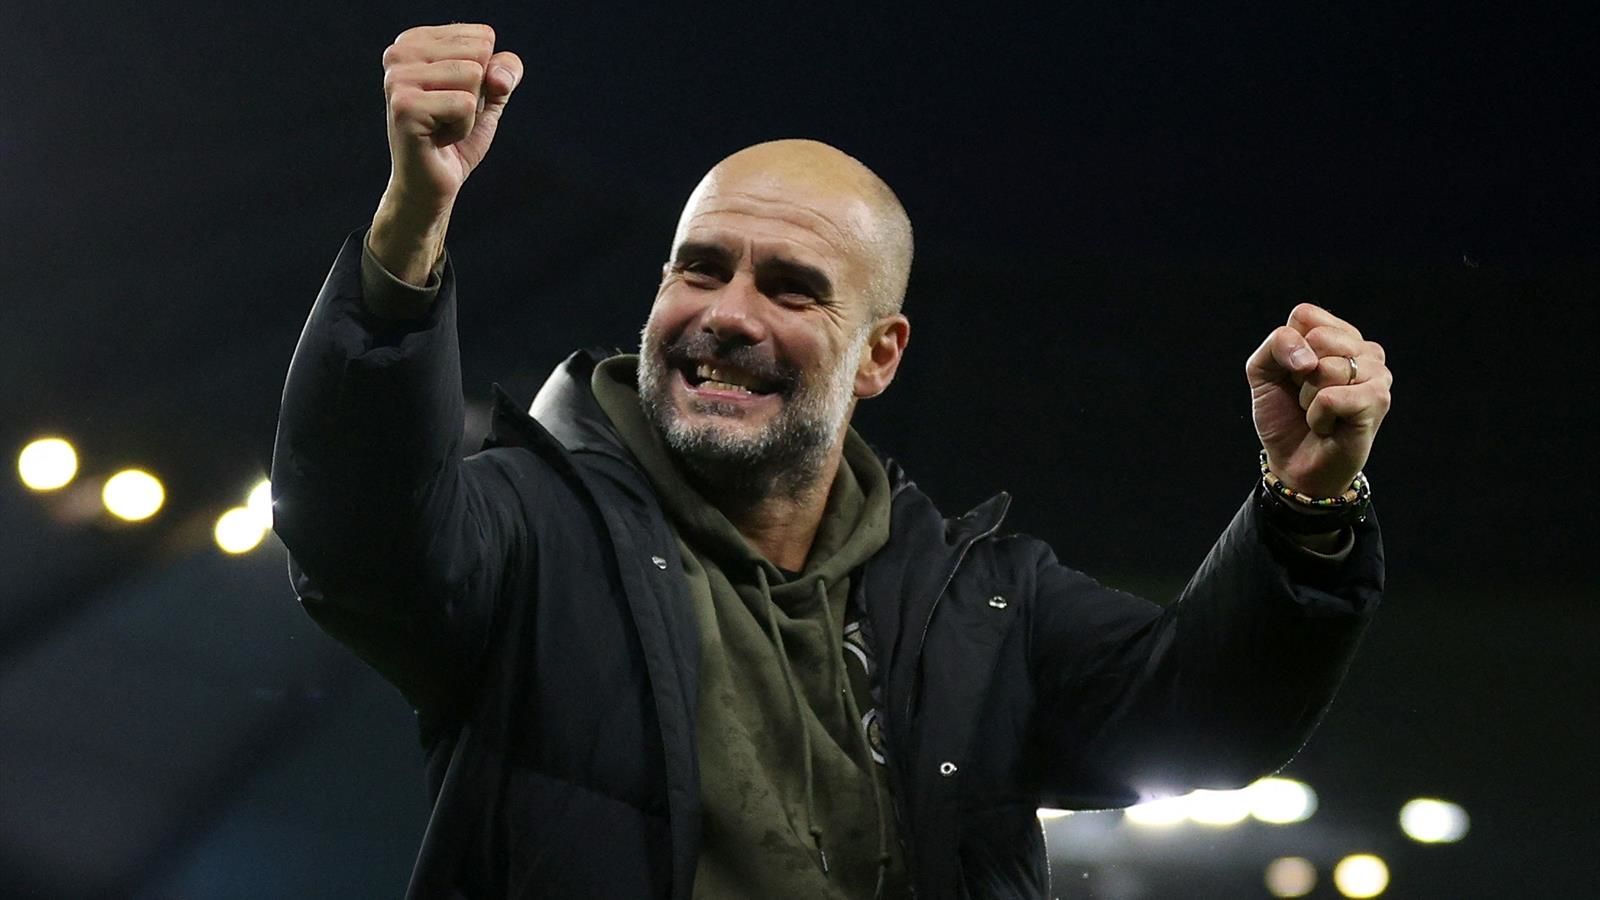 Guardiola extends his contract with Manchester City until 2025